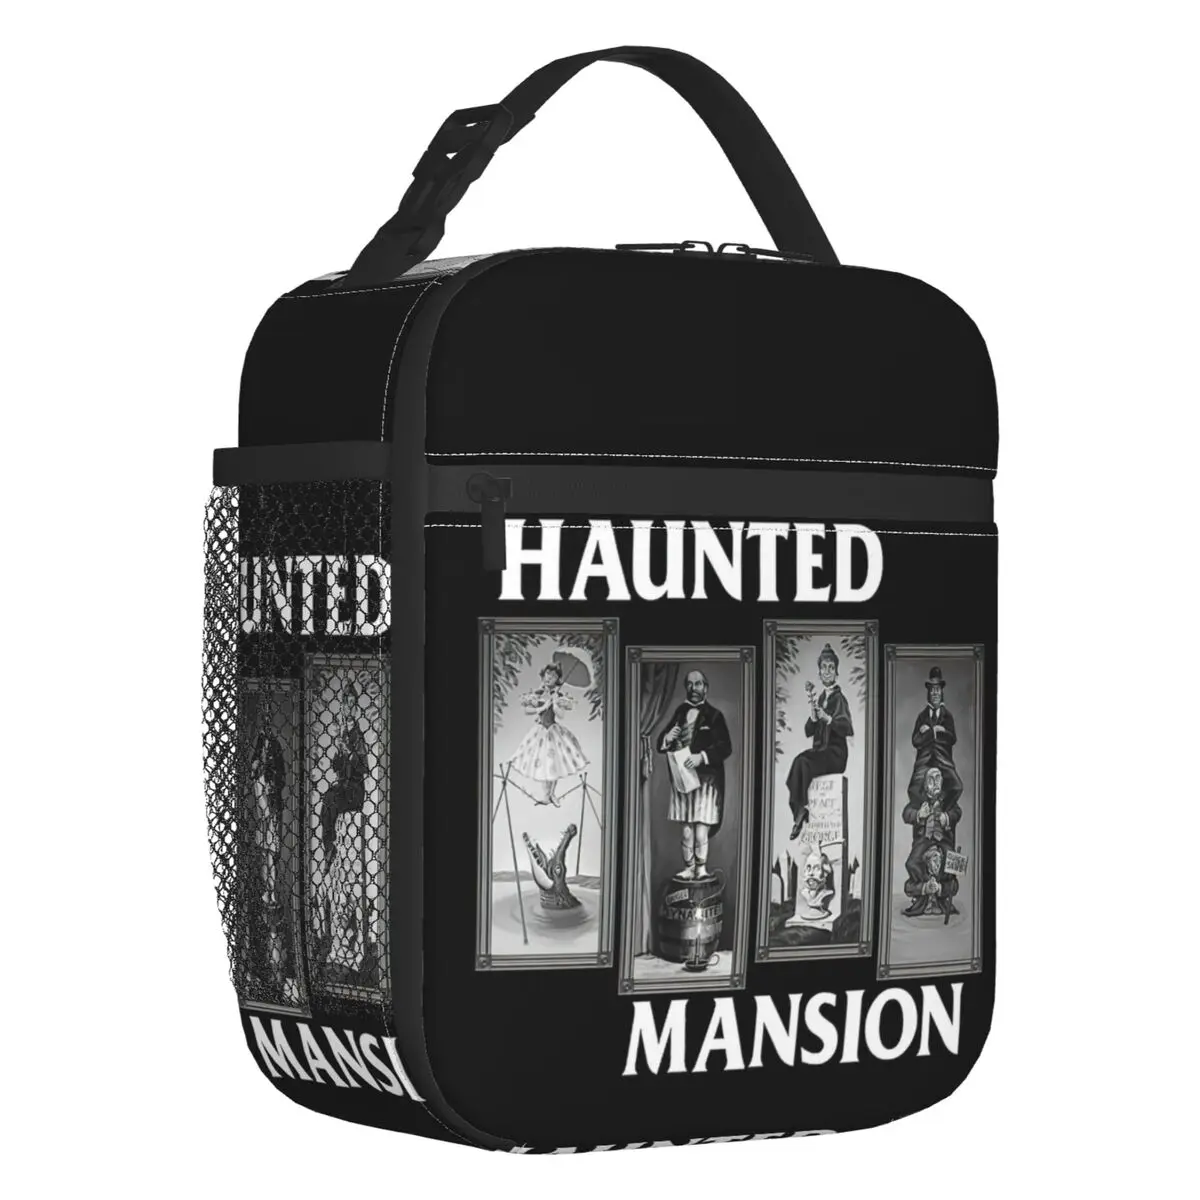 Haunted Mansion Grimace Insulated Lunch Bag for Women Resuable Halloween Ghost Horror Movie Cooler Thermal Lunch Box Kids School